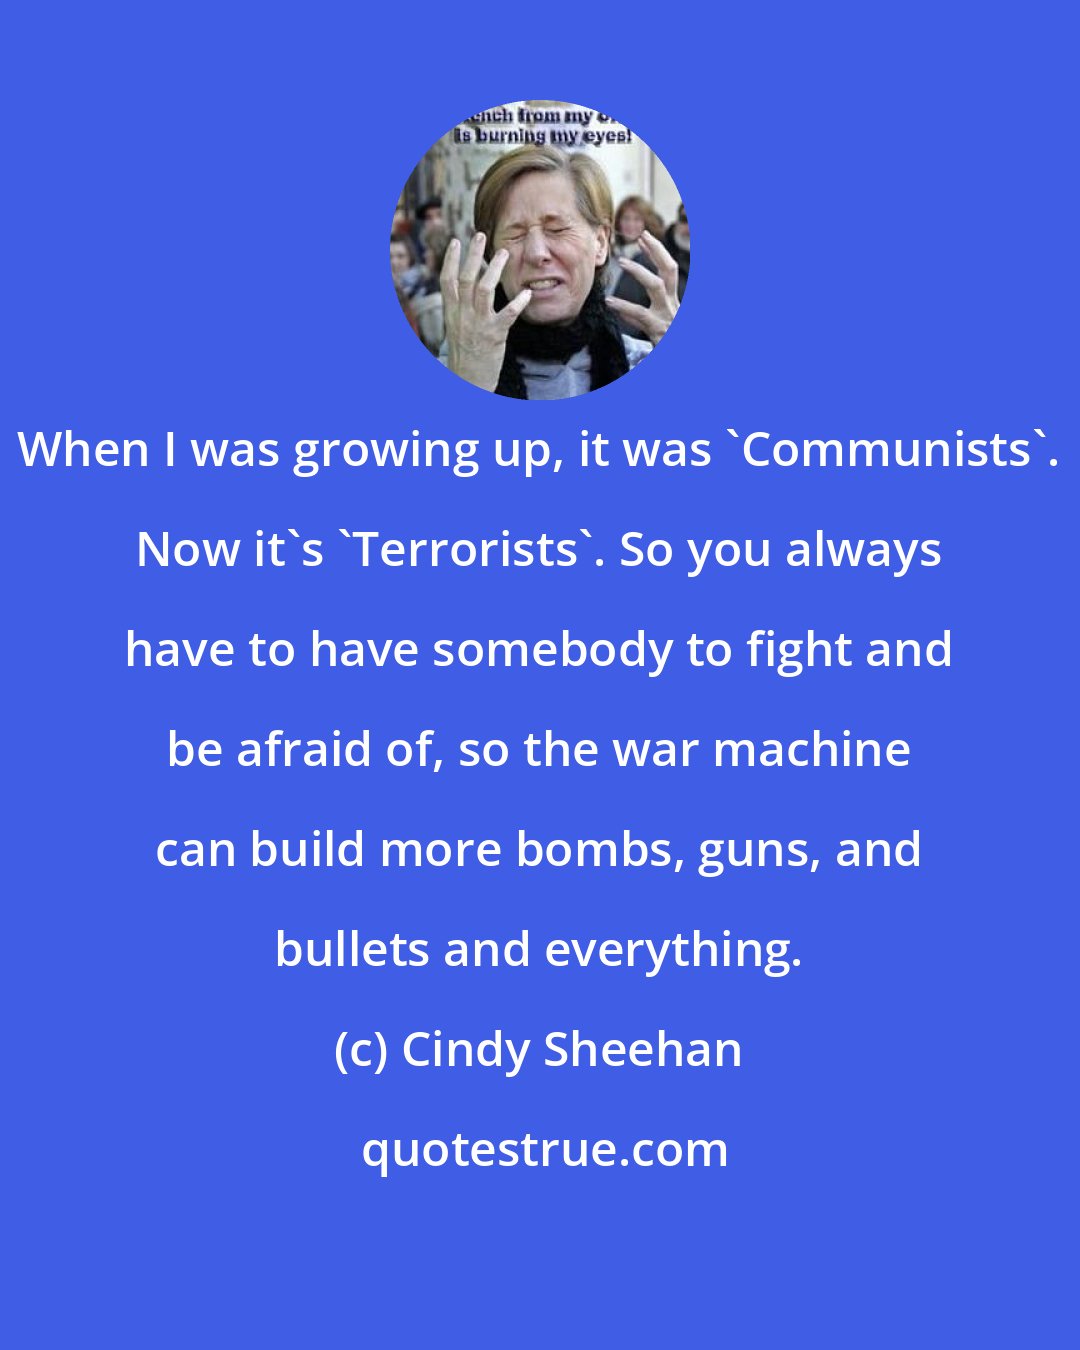 Cindy Sheehan: When I was growing up, it was 'Communists'. Now it's 'Terrorists'. So you always have to have somebody to fight and be afraid of, so the war machine can build more bombs, guns, and bullets and everything.